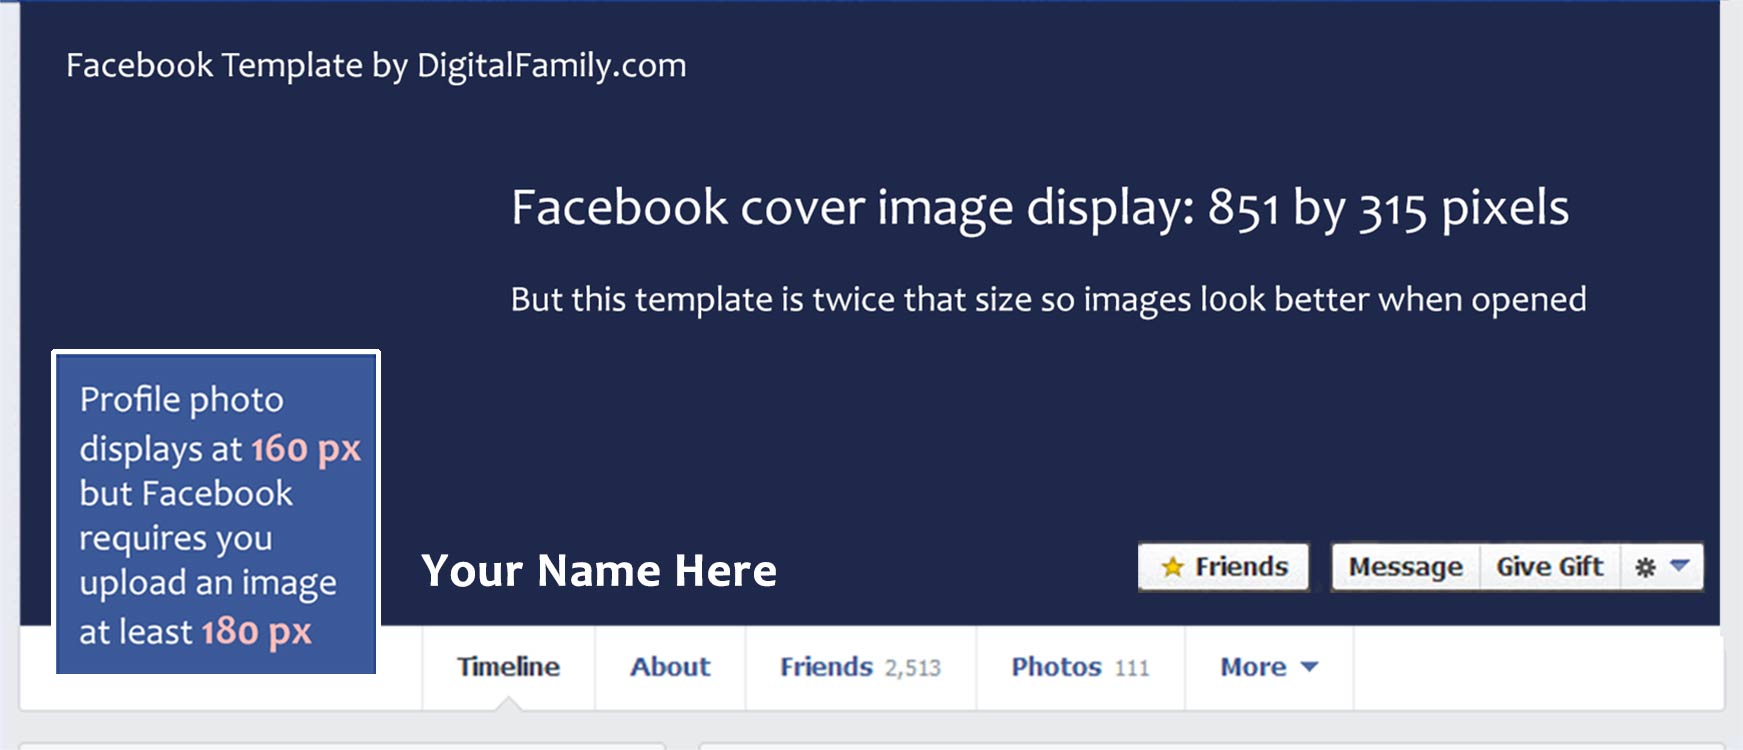 What size should you make your Facebook photos?